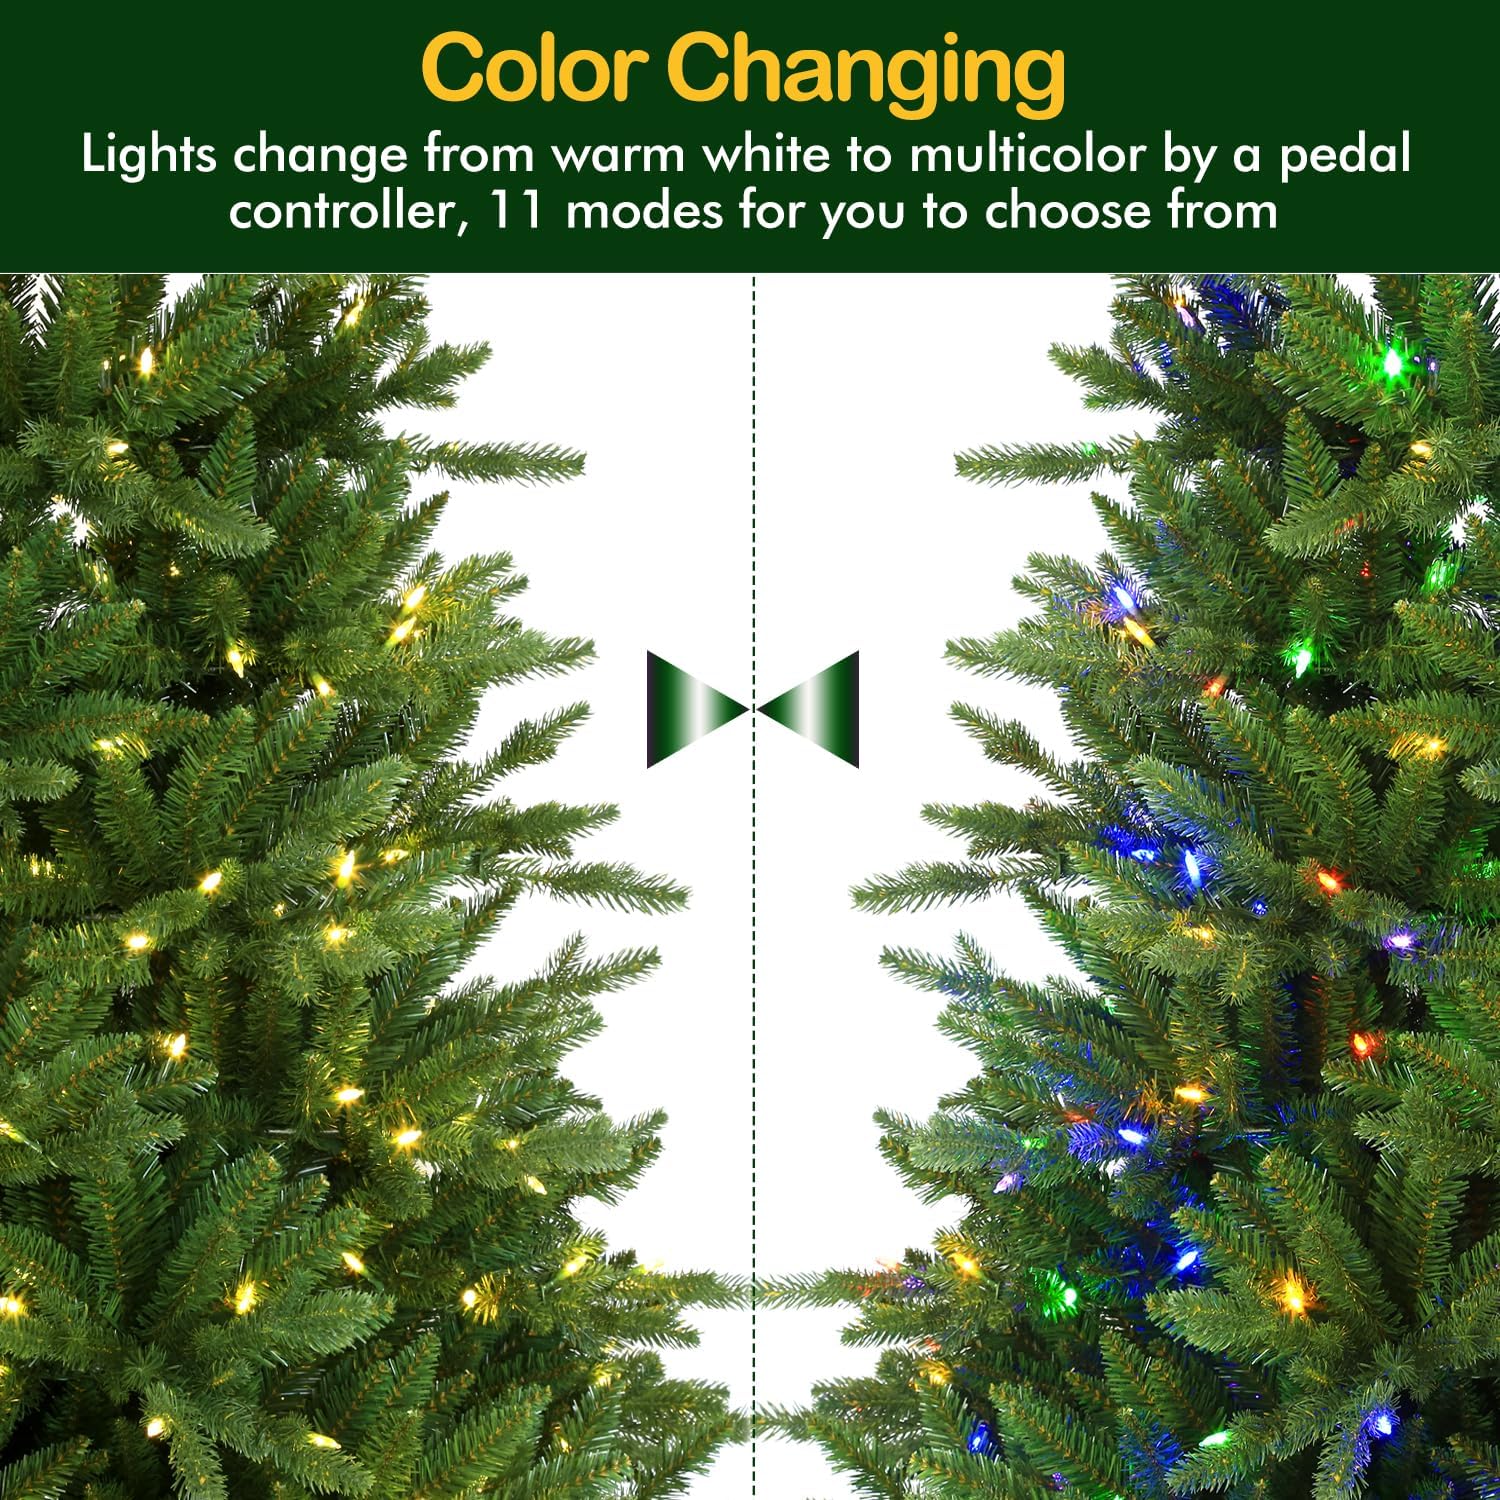 Hykolity 6.5'/7.5'/9' Premium Prelit Christmas Tree with Color Changing Twinkly LED Lights, Branch Tips, Metal Stand & Hinged Branches, 11 Color Modes